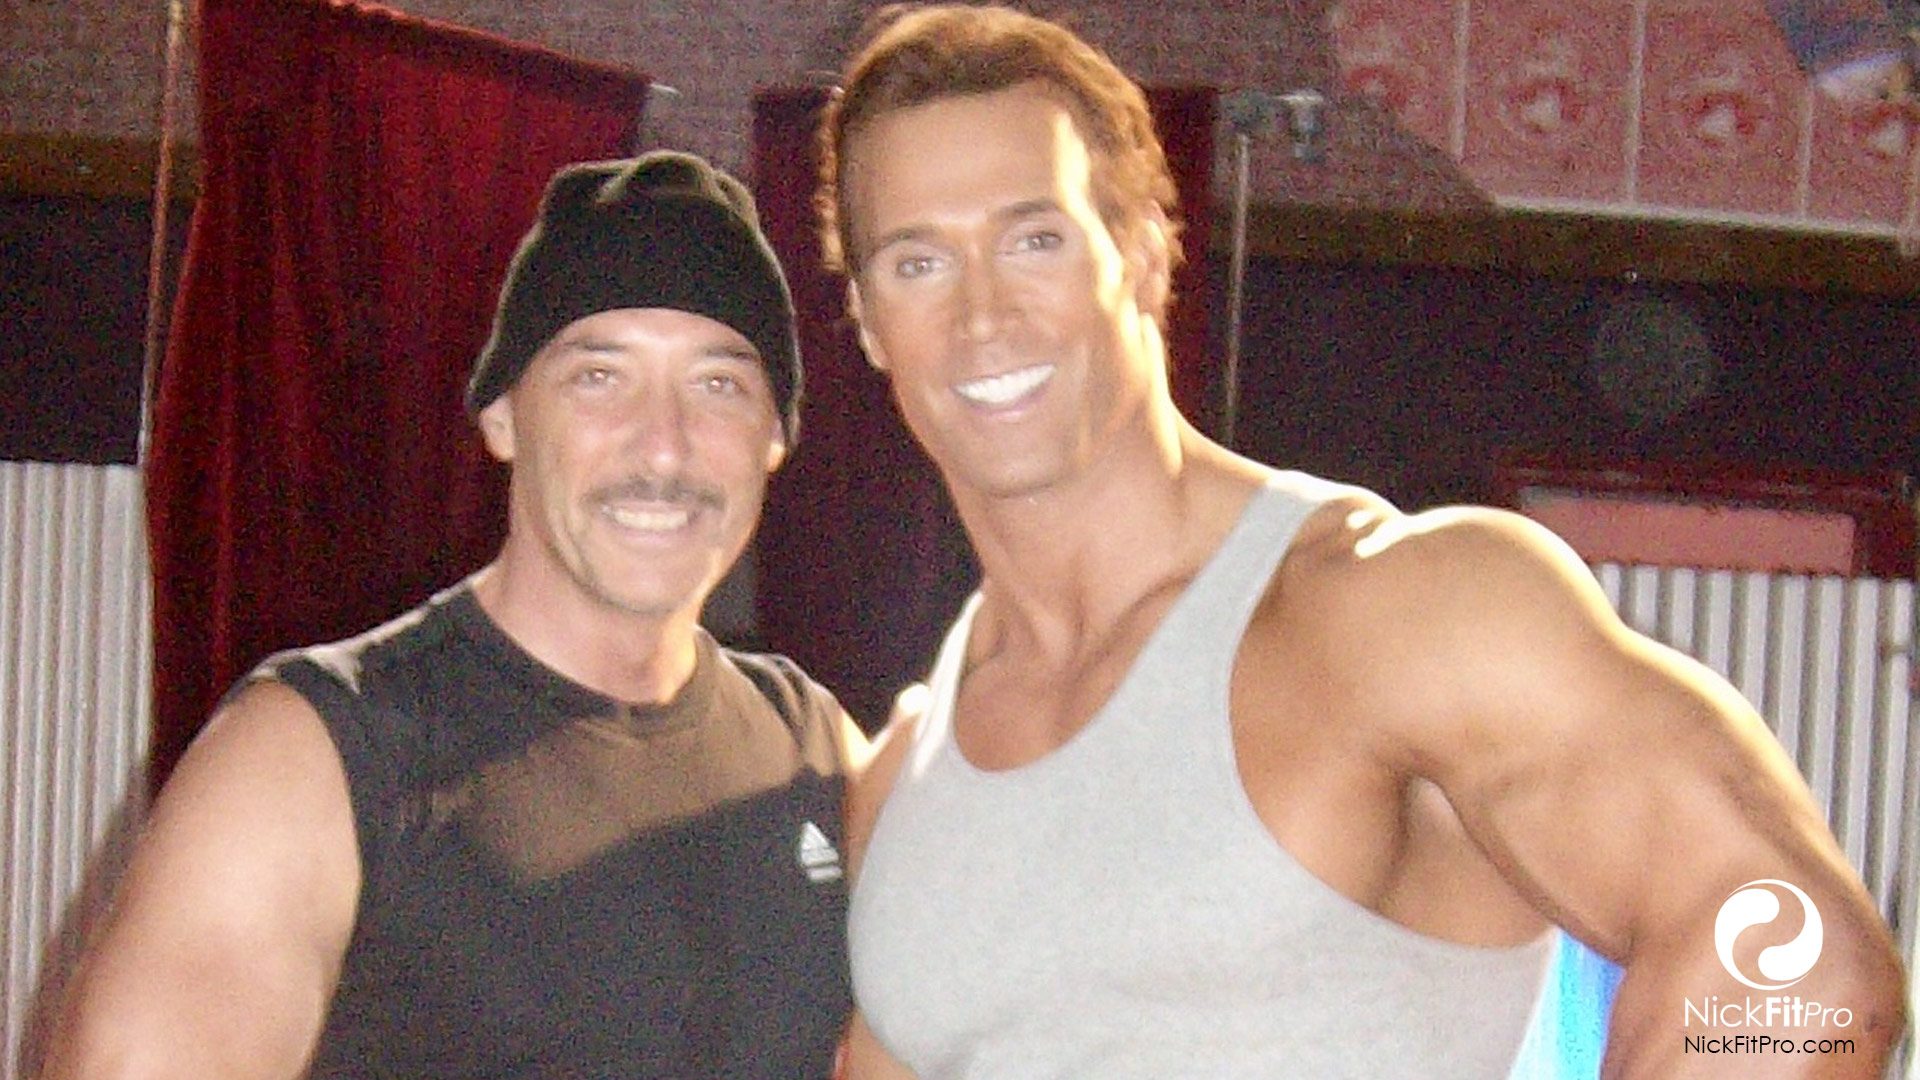 Pro Bodybuilder and Actor Michael O’Hearn on set of film ALTER EGO